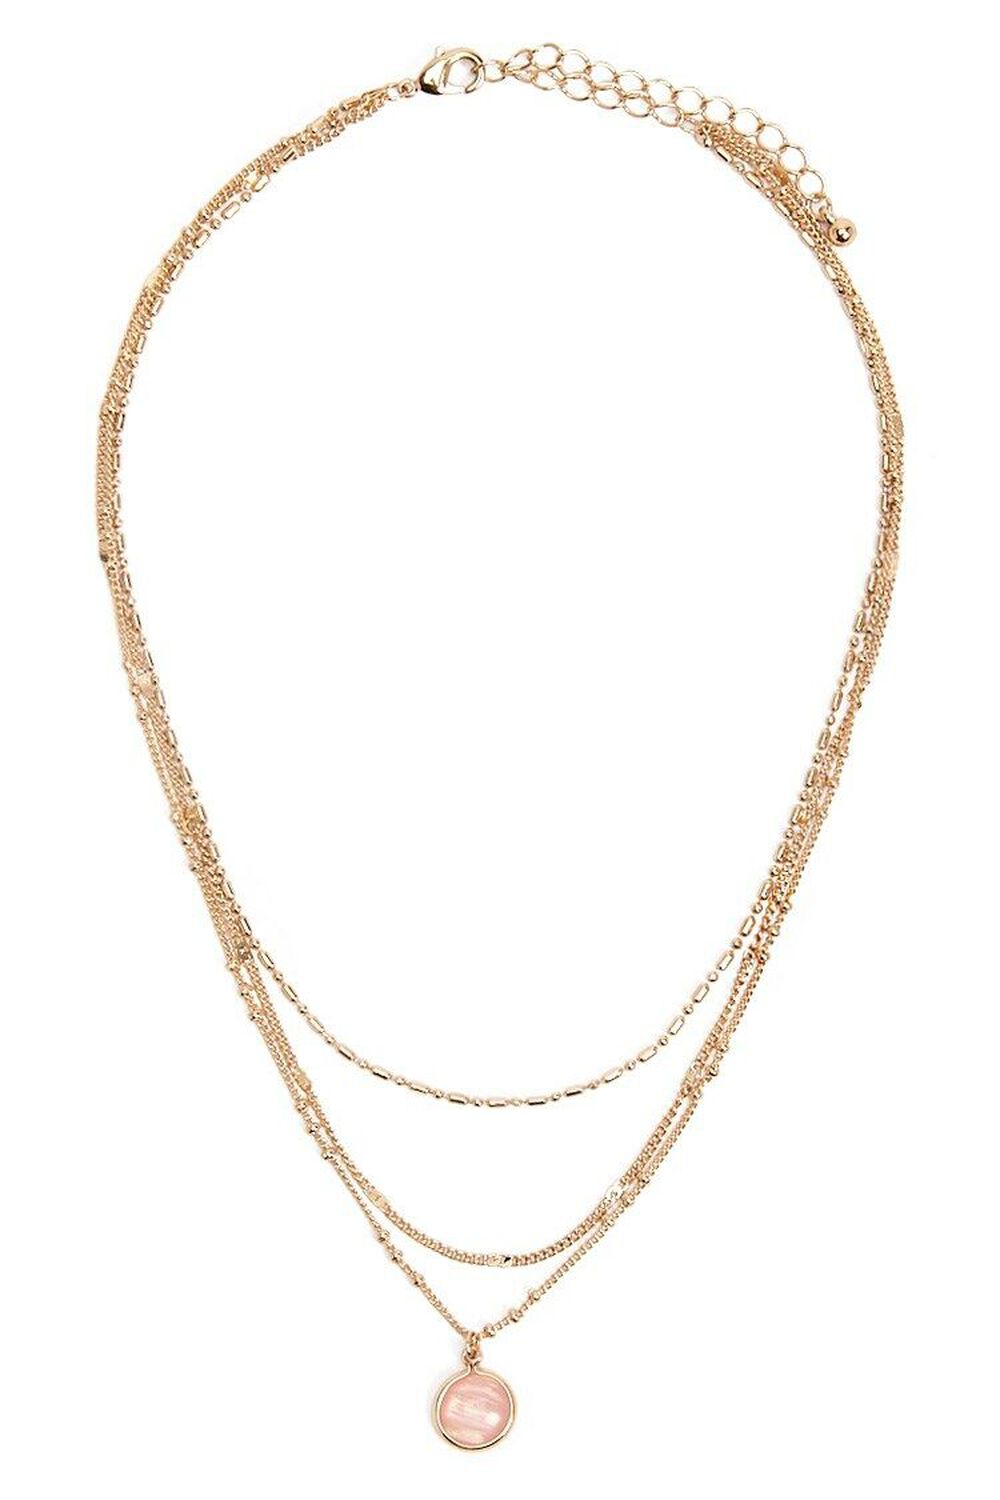 GOLD/PINK Layered Chain Necklace, image 2